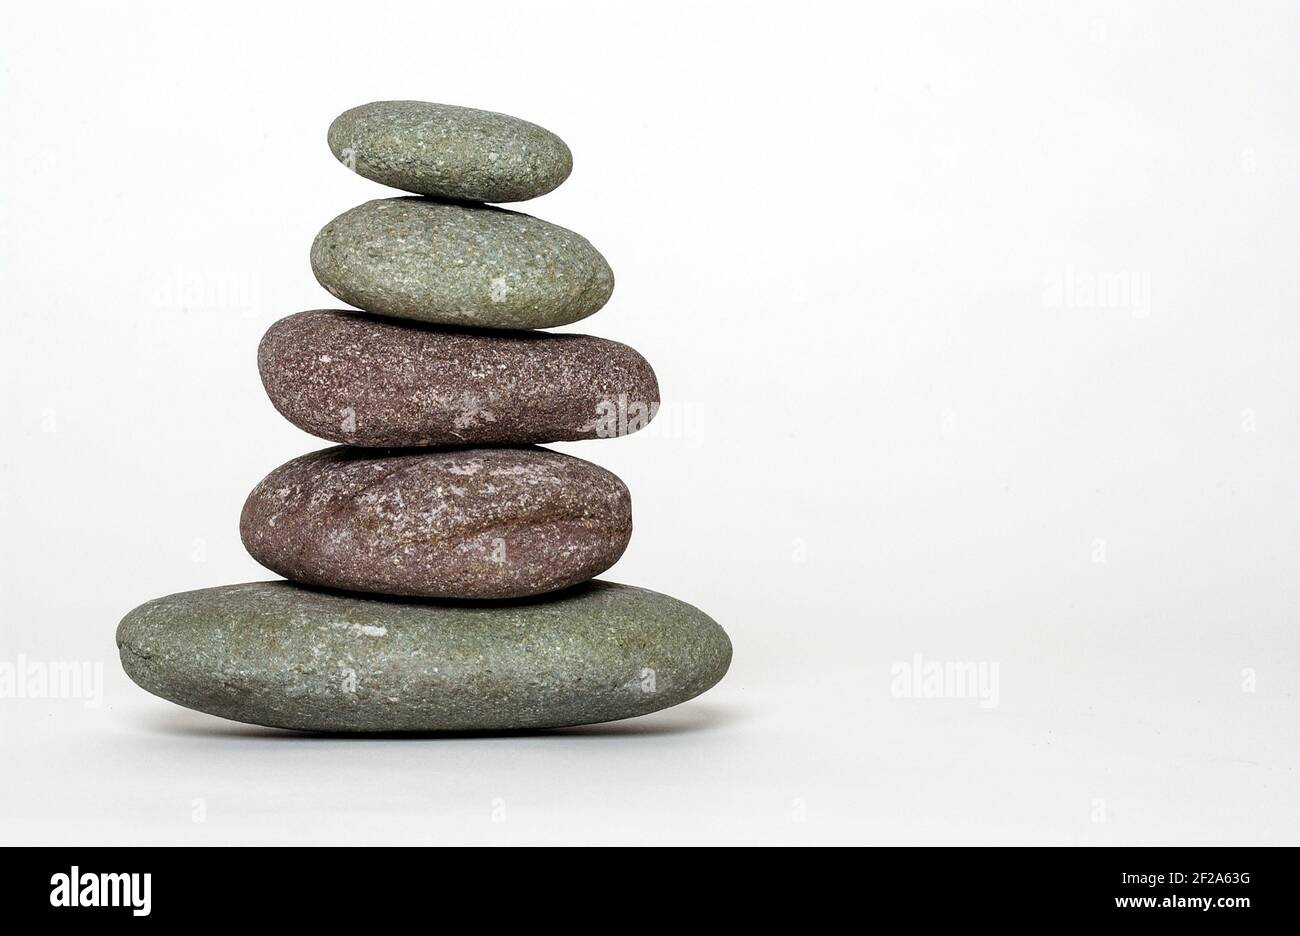 Stones balanced on one another against a white background Stock Photo